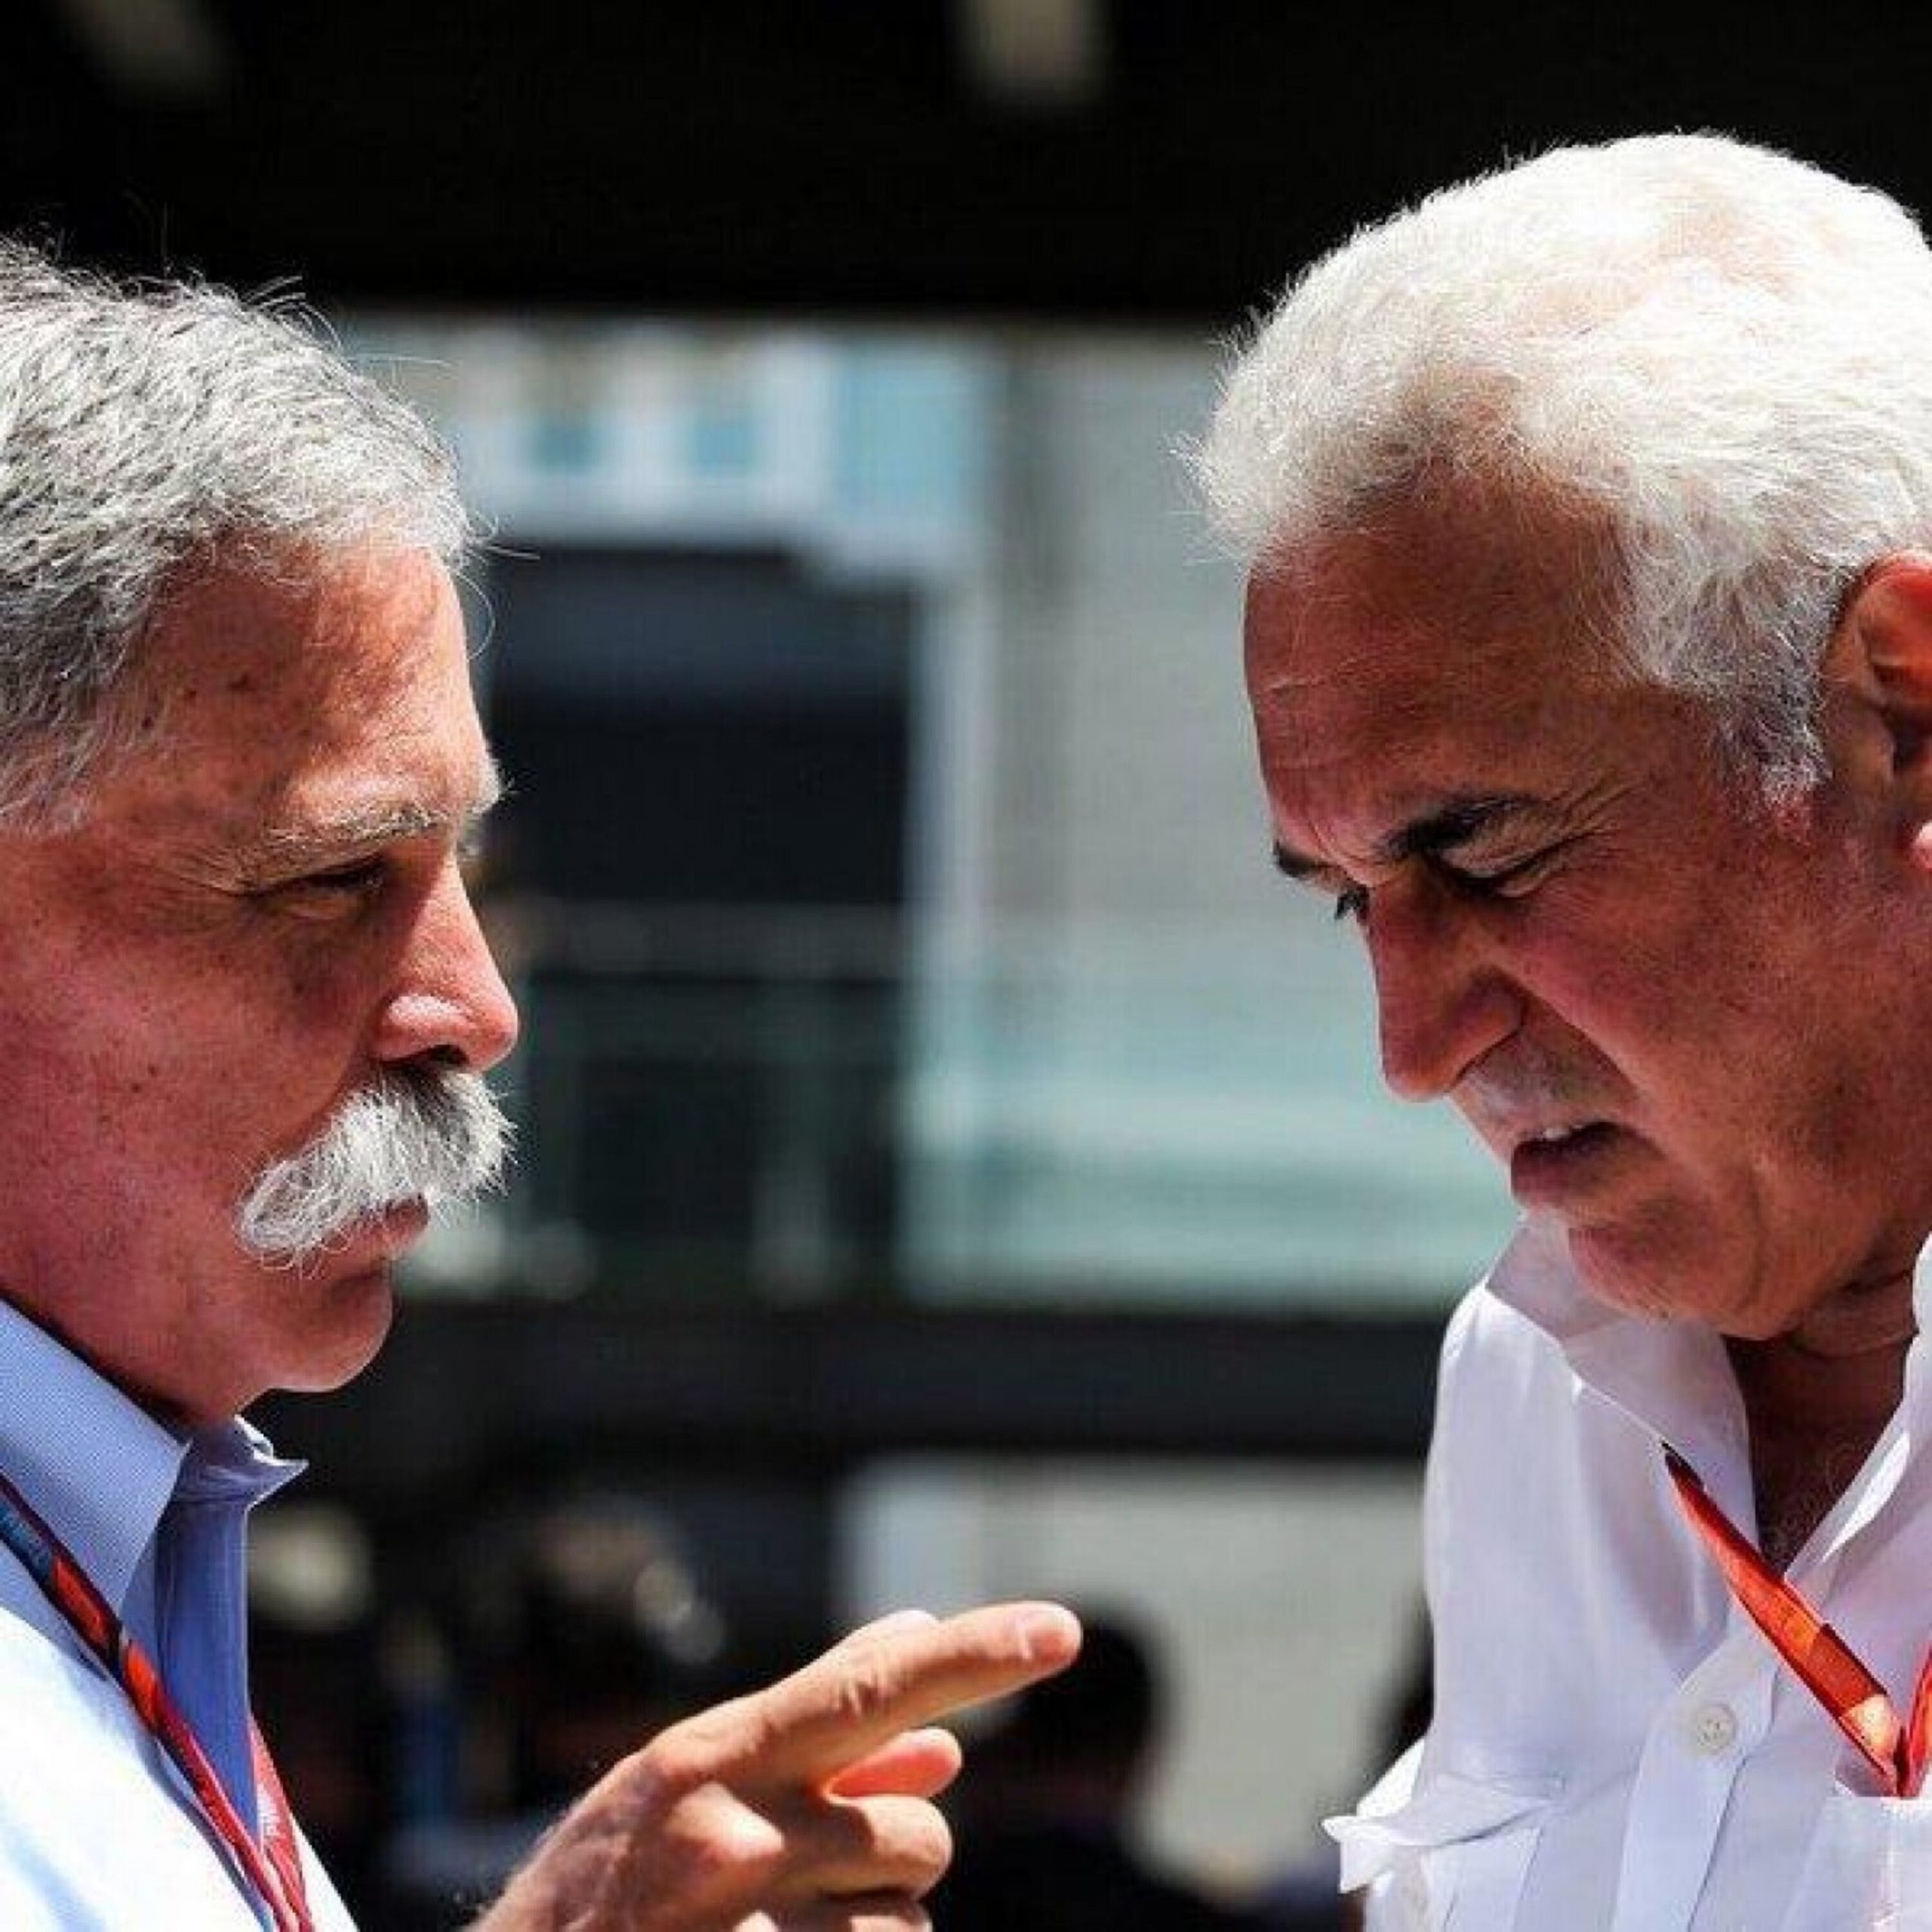 4: Lawrence Stroll's Next Target? Buy F1